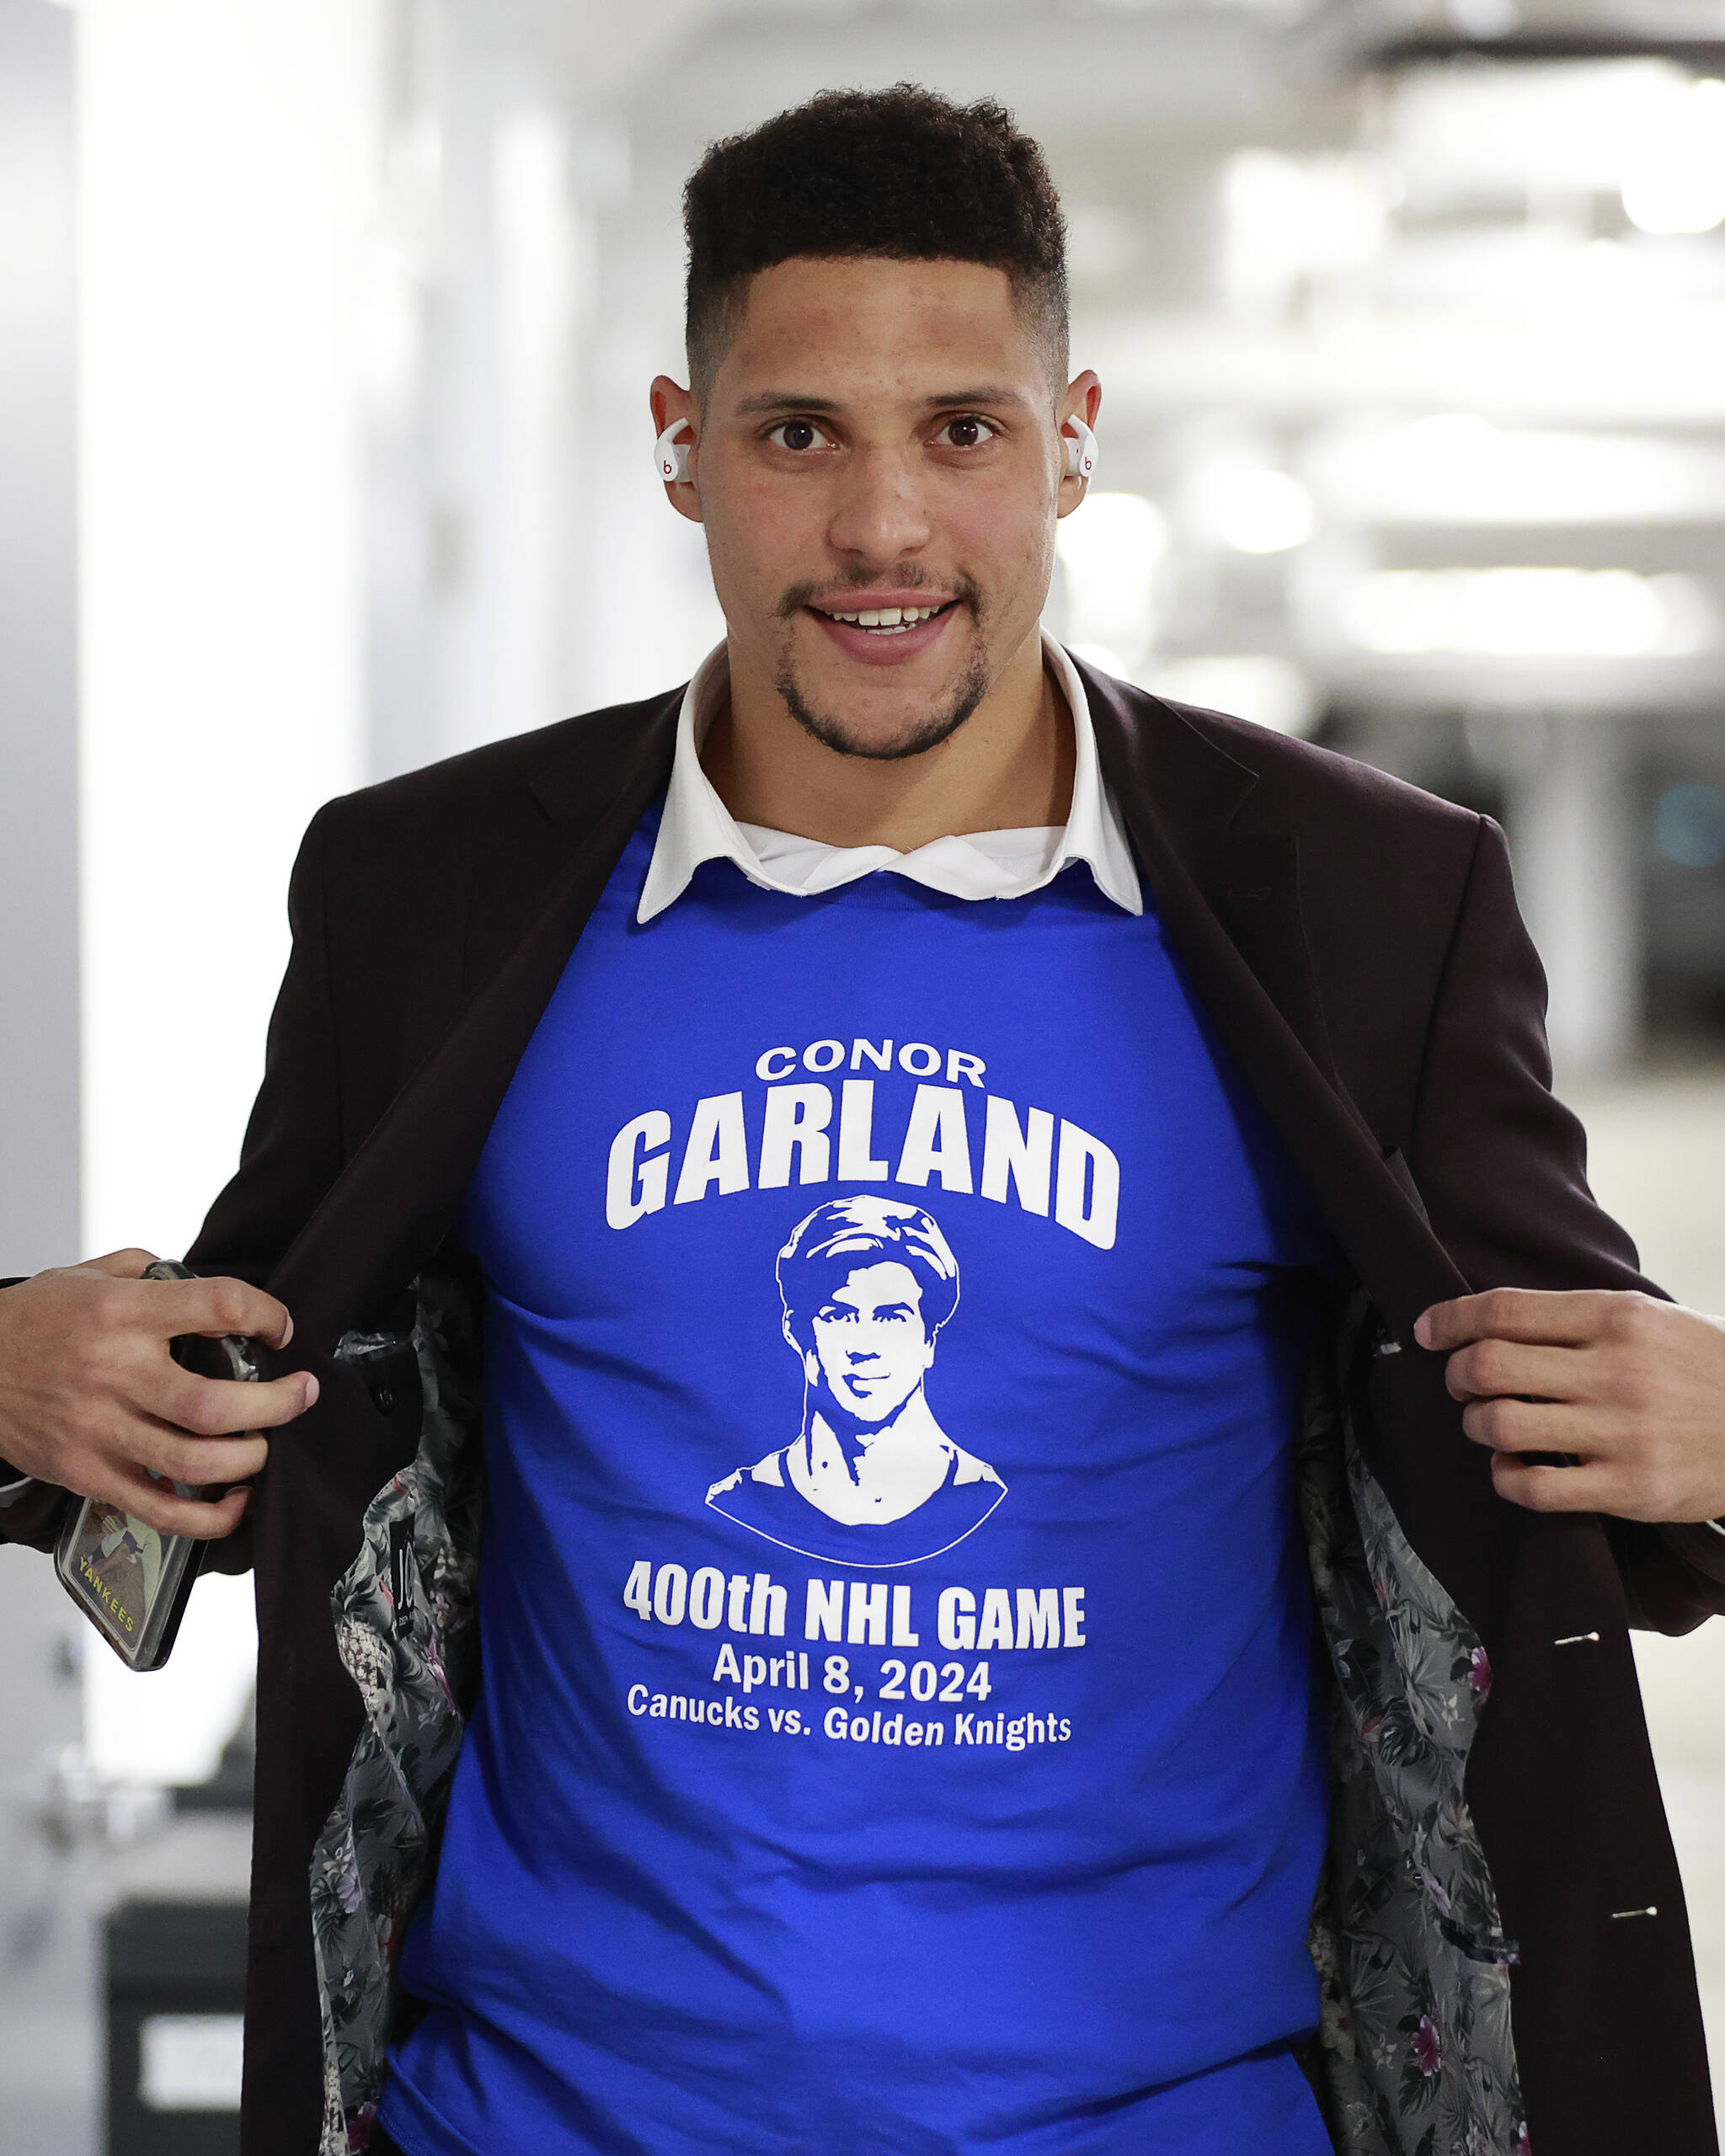 Vancouver’s Dakota Joshua arrives at Rogers Arena wearing a t-shirt comemarting Conor Garland’s 400th NHL game. Garland would score twice in the Canucks 4-3 win against the Vegas Golden Knights Monday night at Rogers Arena. Vancouver Canucks photo